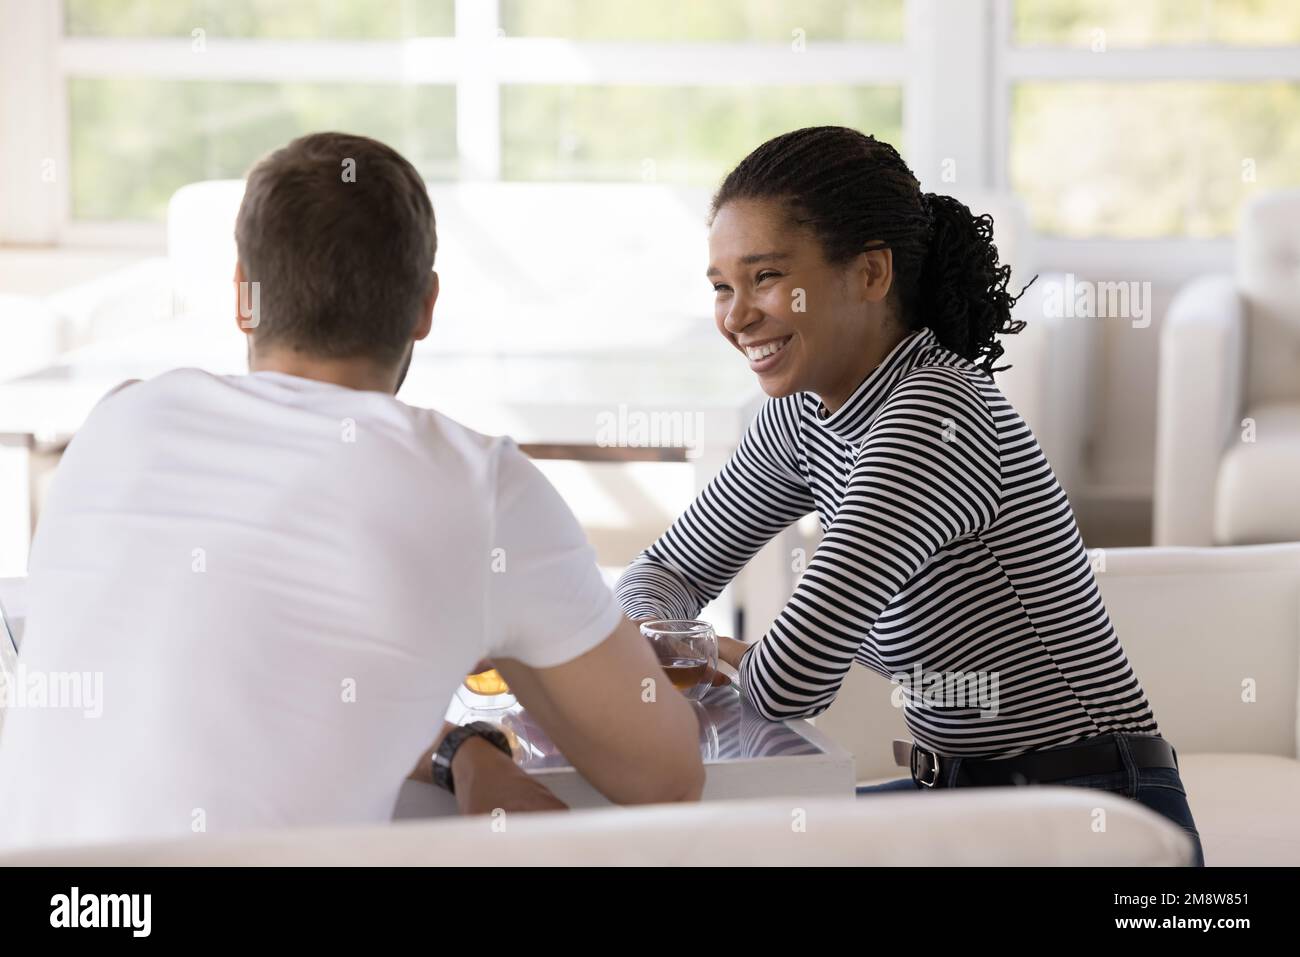 Cheerful young African American girl speaking to Caucasian male friend Stock Photo